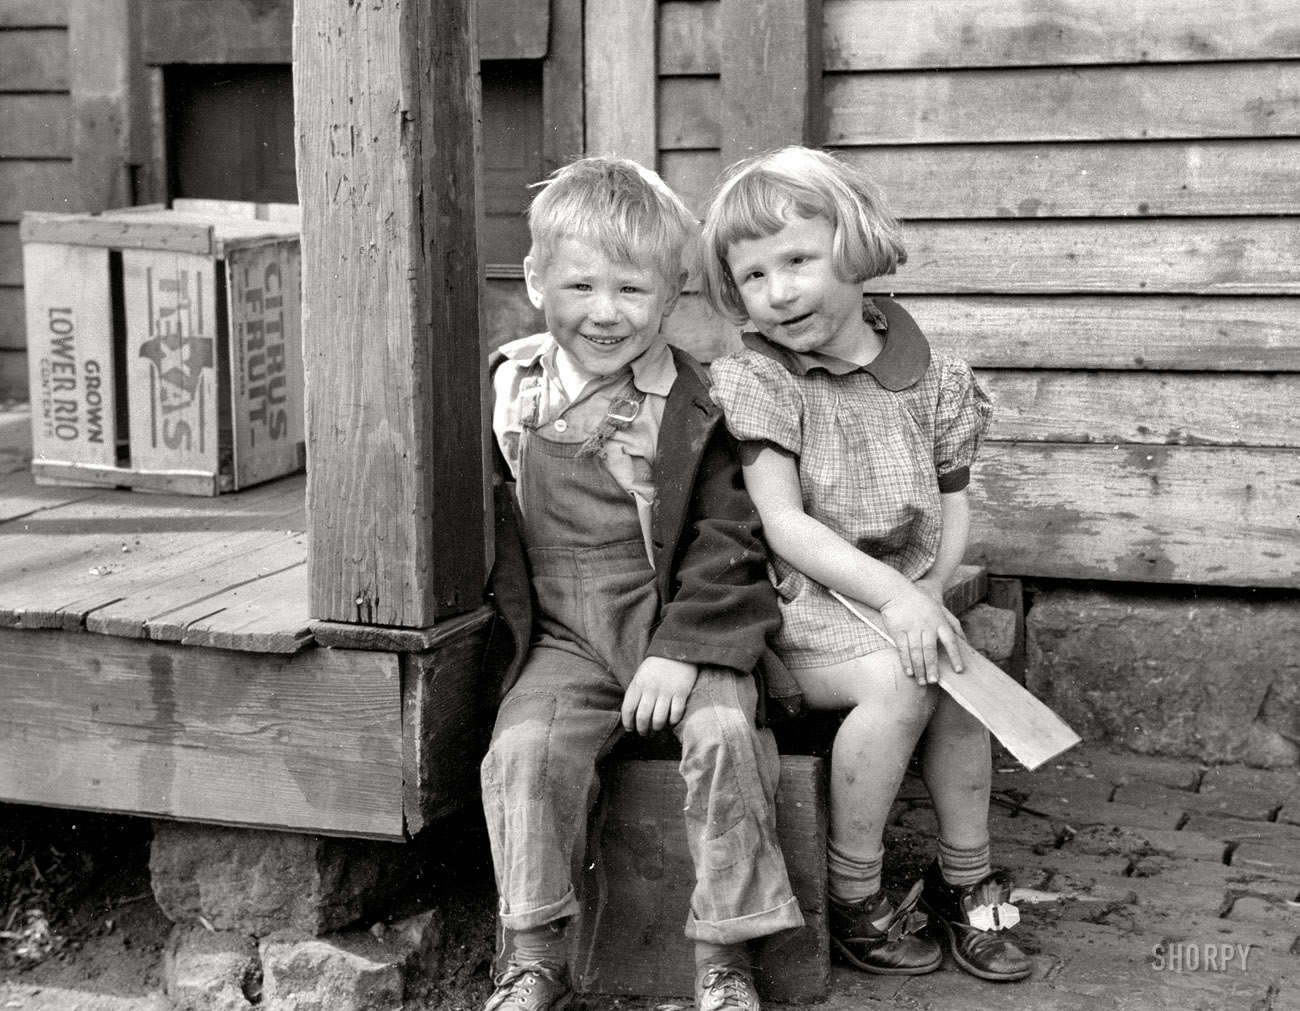 April 1940. Dubuque, Iowa. "Children who live in the slums." Our second look at this towheaded twosome, a sort of proto-Opie and his sister. 35mm nitrate negative by John Vachon for the Farm Security Administration. View full size.